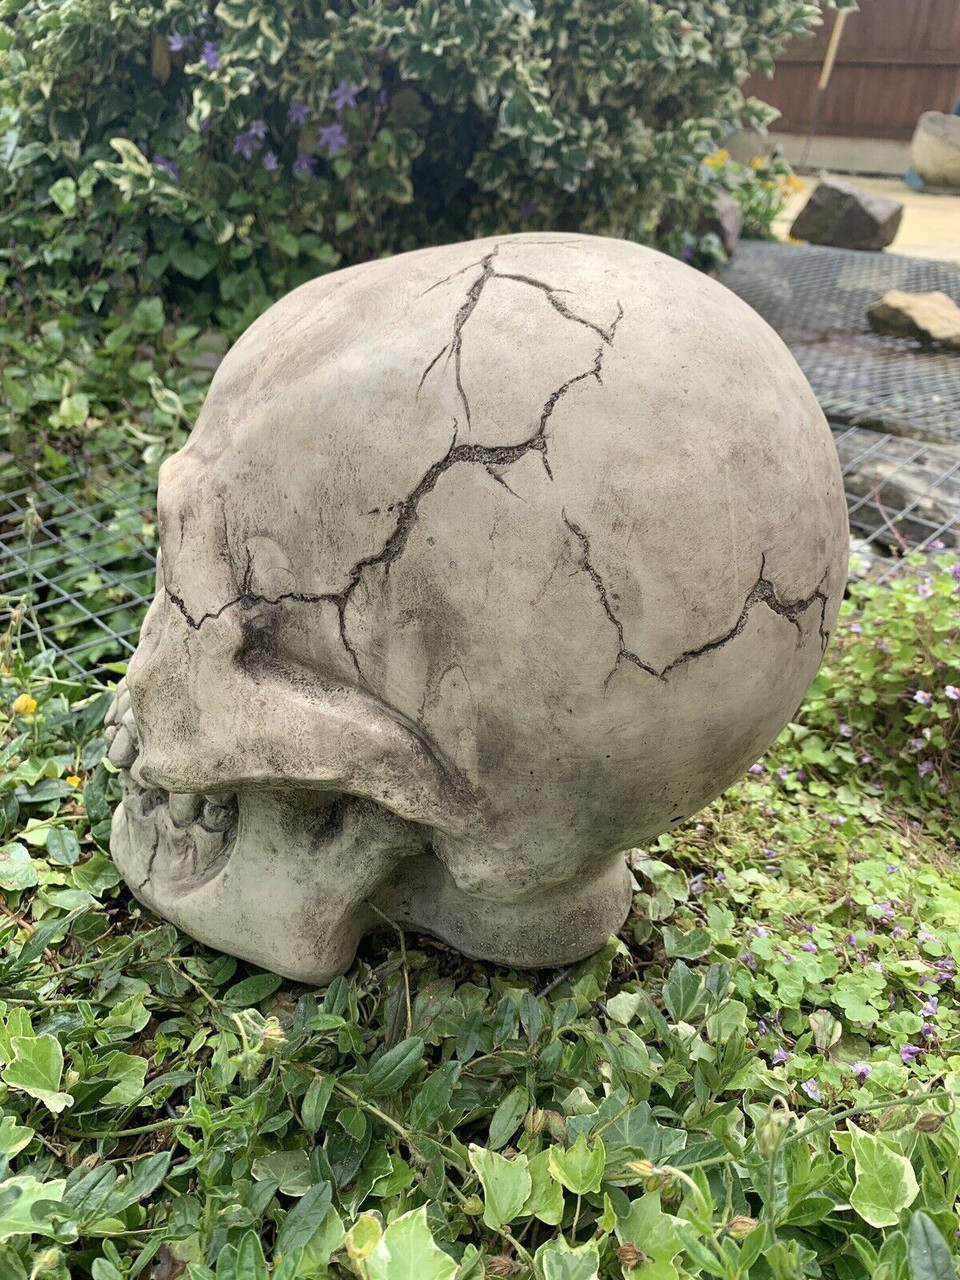 STONE GARDEN LARGE DETAILED SOLID GOTHIC SKULL GIFT CONCRETE ORNAMENT